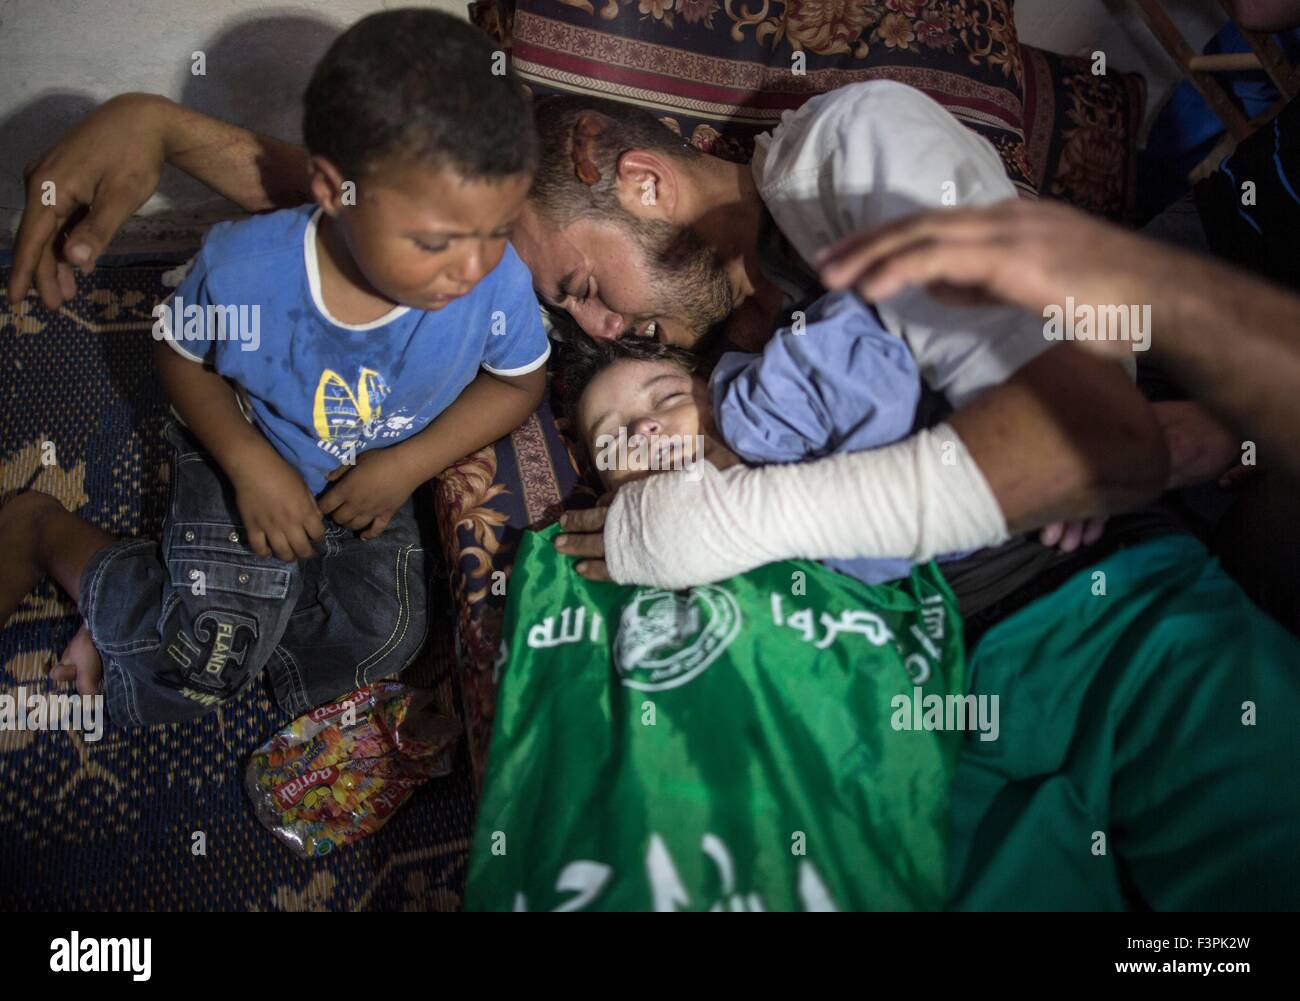 Gaza. 11th Oct, 2015. The wounded father of Palestinian girl Rahaf Hassan, 2 years old, hugs the body of his daughter during her funeral at the al-Nusairat refugee camp in central Gaza Strip on Oct. 11, 2015. Rahaf and her pregnant mother were killed after their house collapsed in an Israeli air strike. © Wissam Nassar/Xinhua/Alamy Live News Stock Photo